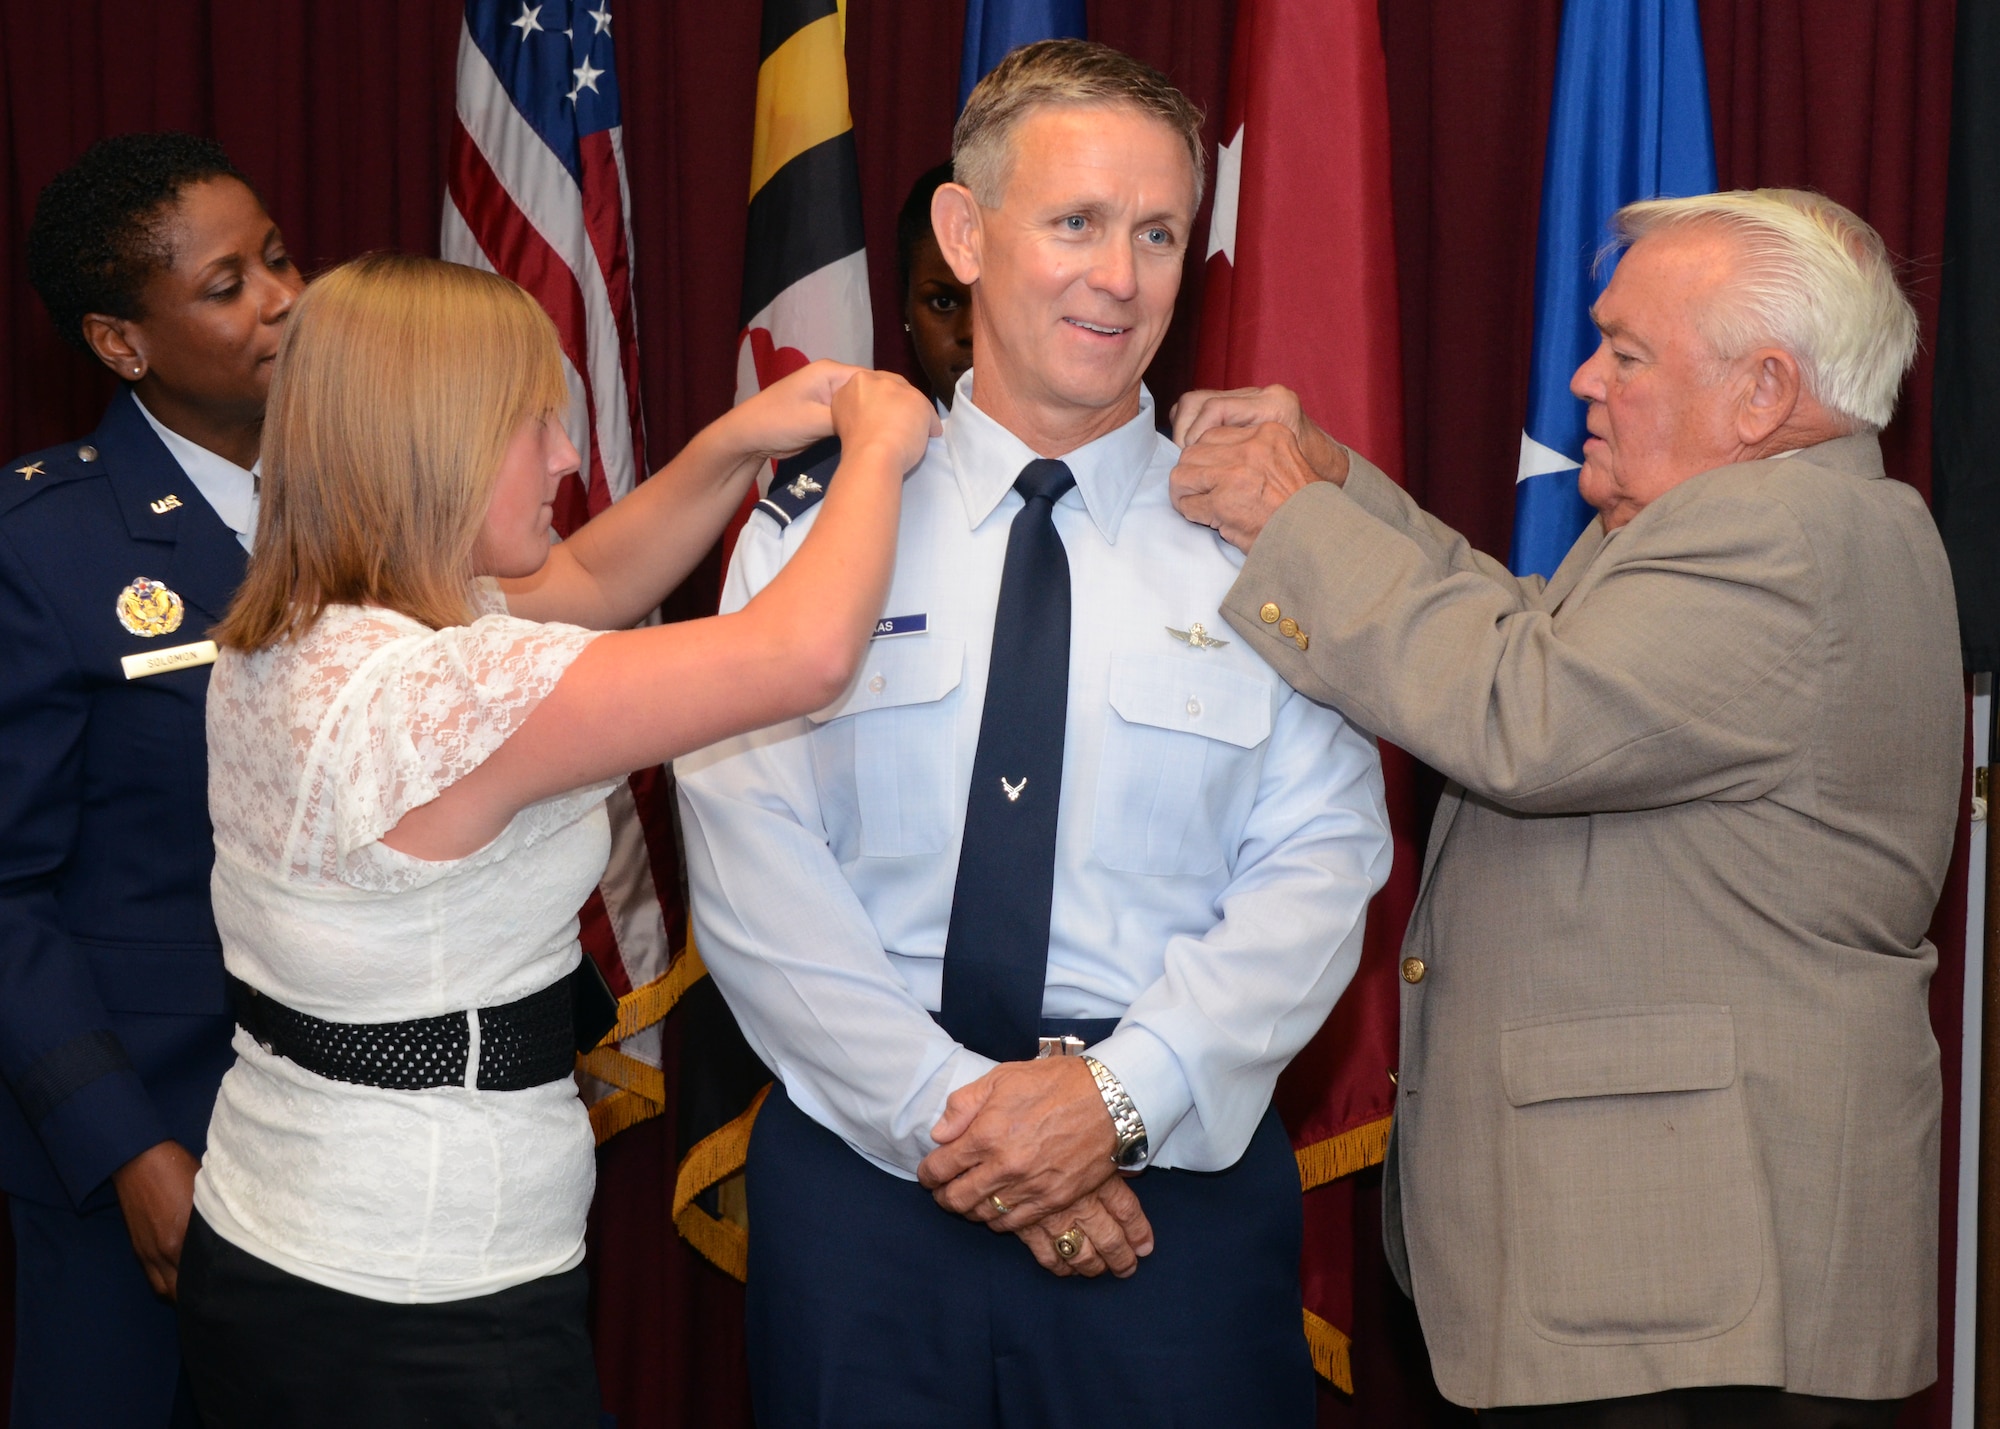 U.S. Air Force Col. Paul C. Maas Jr., Deputy Mission Support Group Commander, Maryland National Guard, was promoted to Brigadier General. His daughter and father changed his epaulets during his ceremony at Warfield Air National Guard Base, Baltimore, Md., on July 20, 2012.  (National Guard photo by Staff Sgt. Benjamin Hughes)